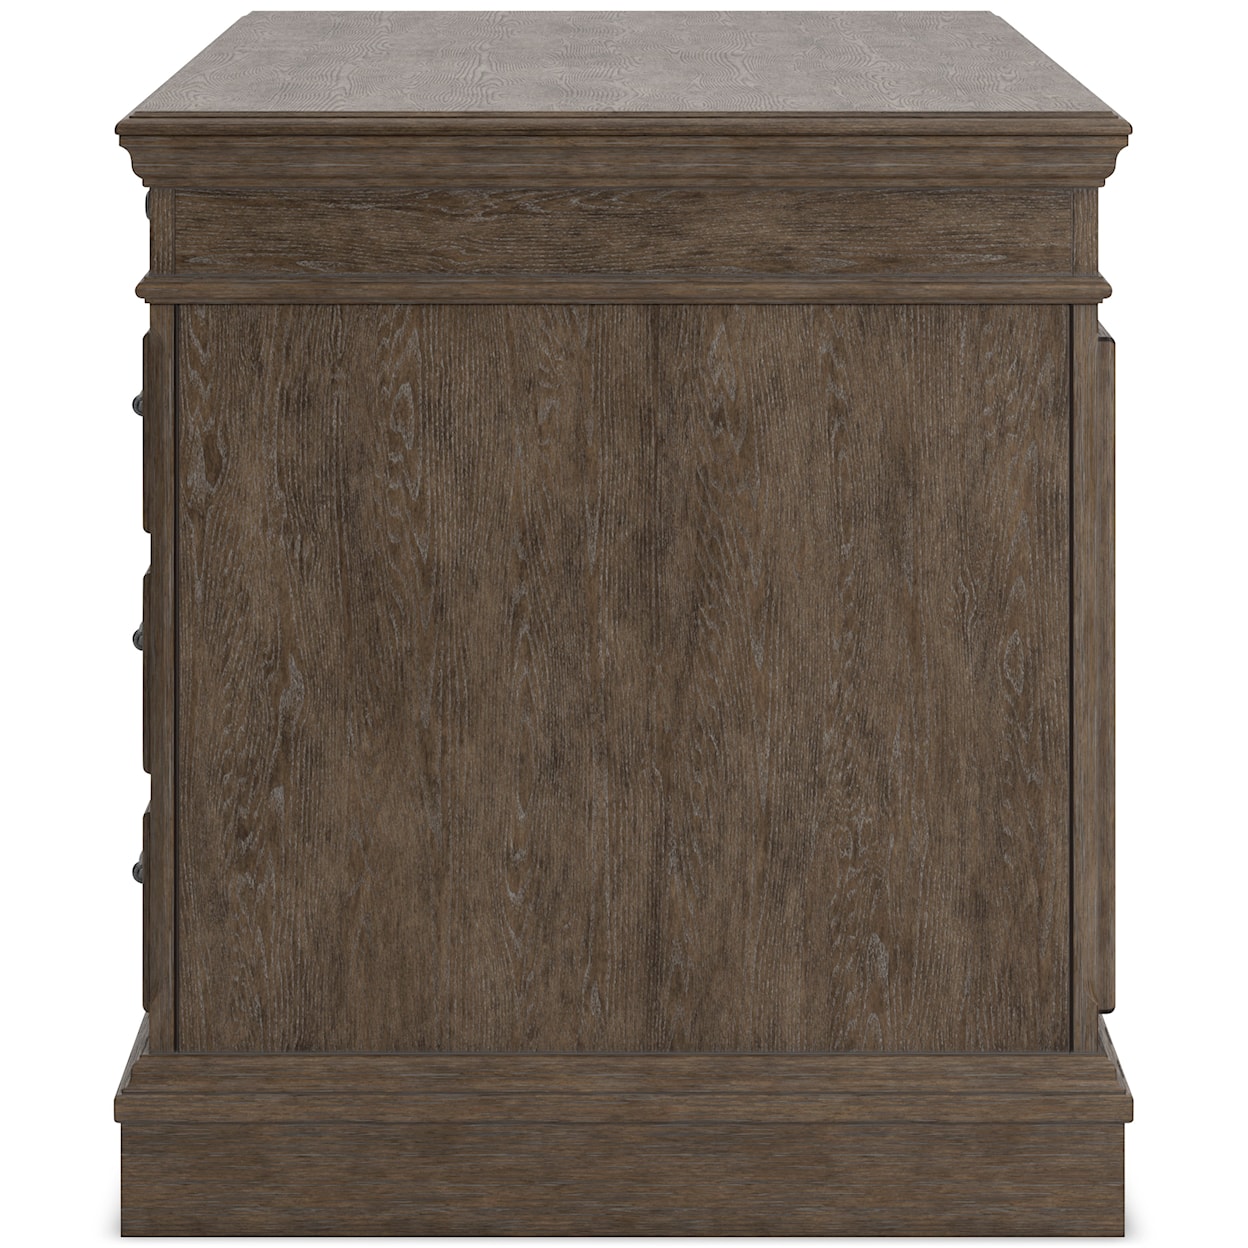 Signature Design by Ashley Janismore Home Office Desk